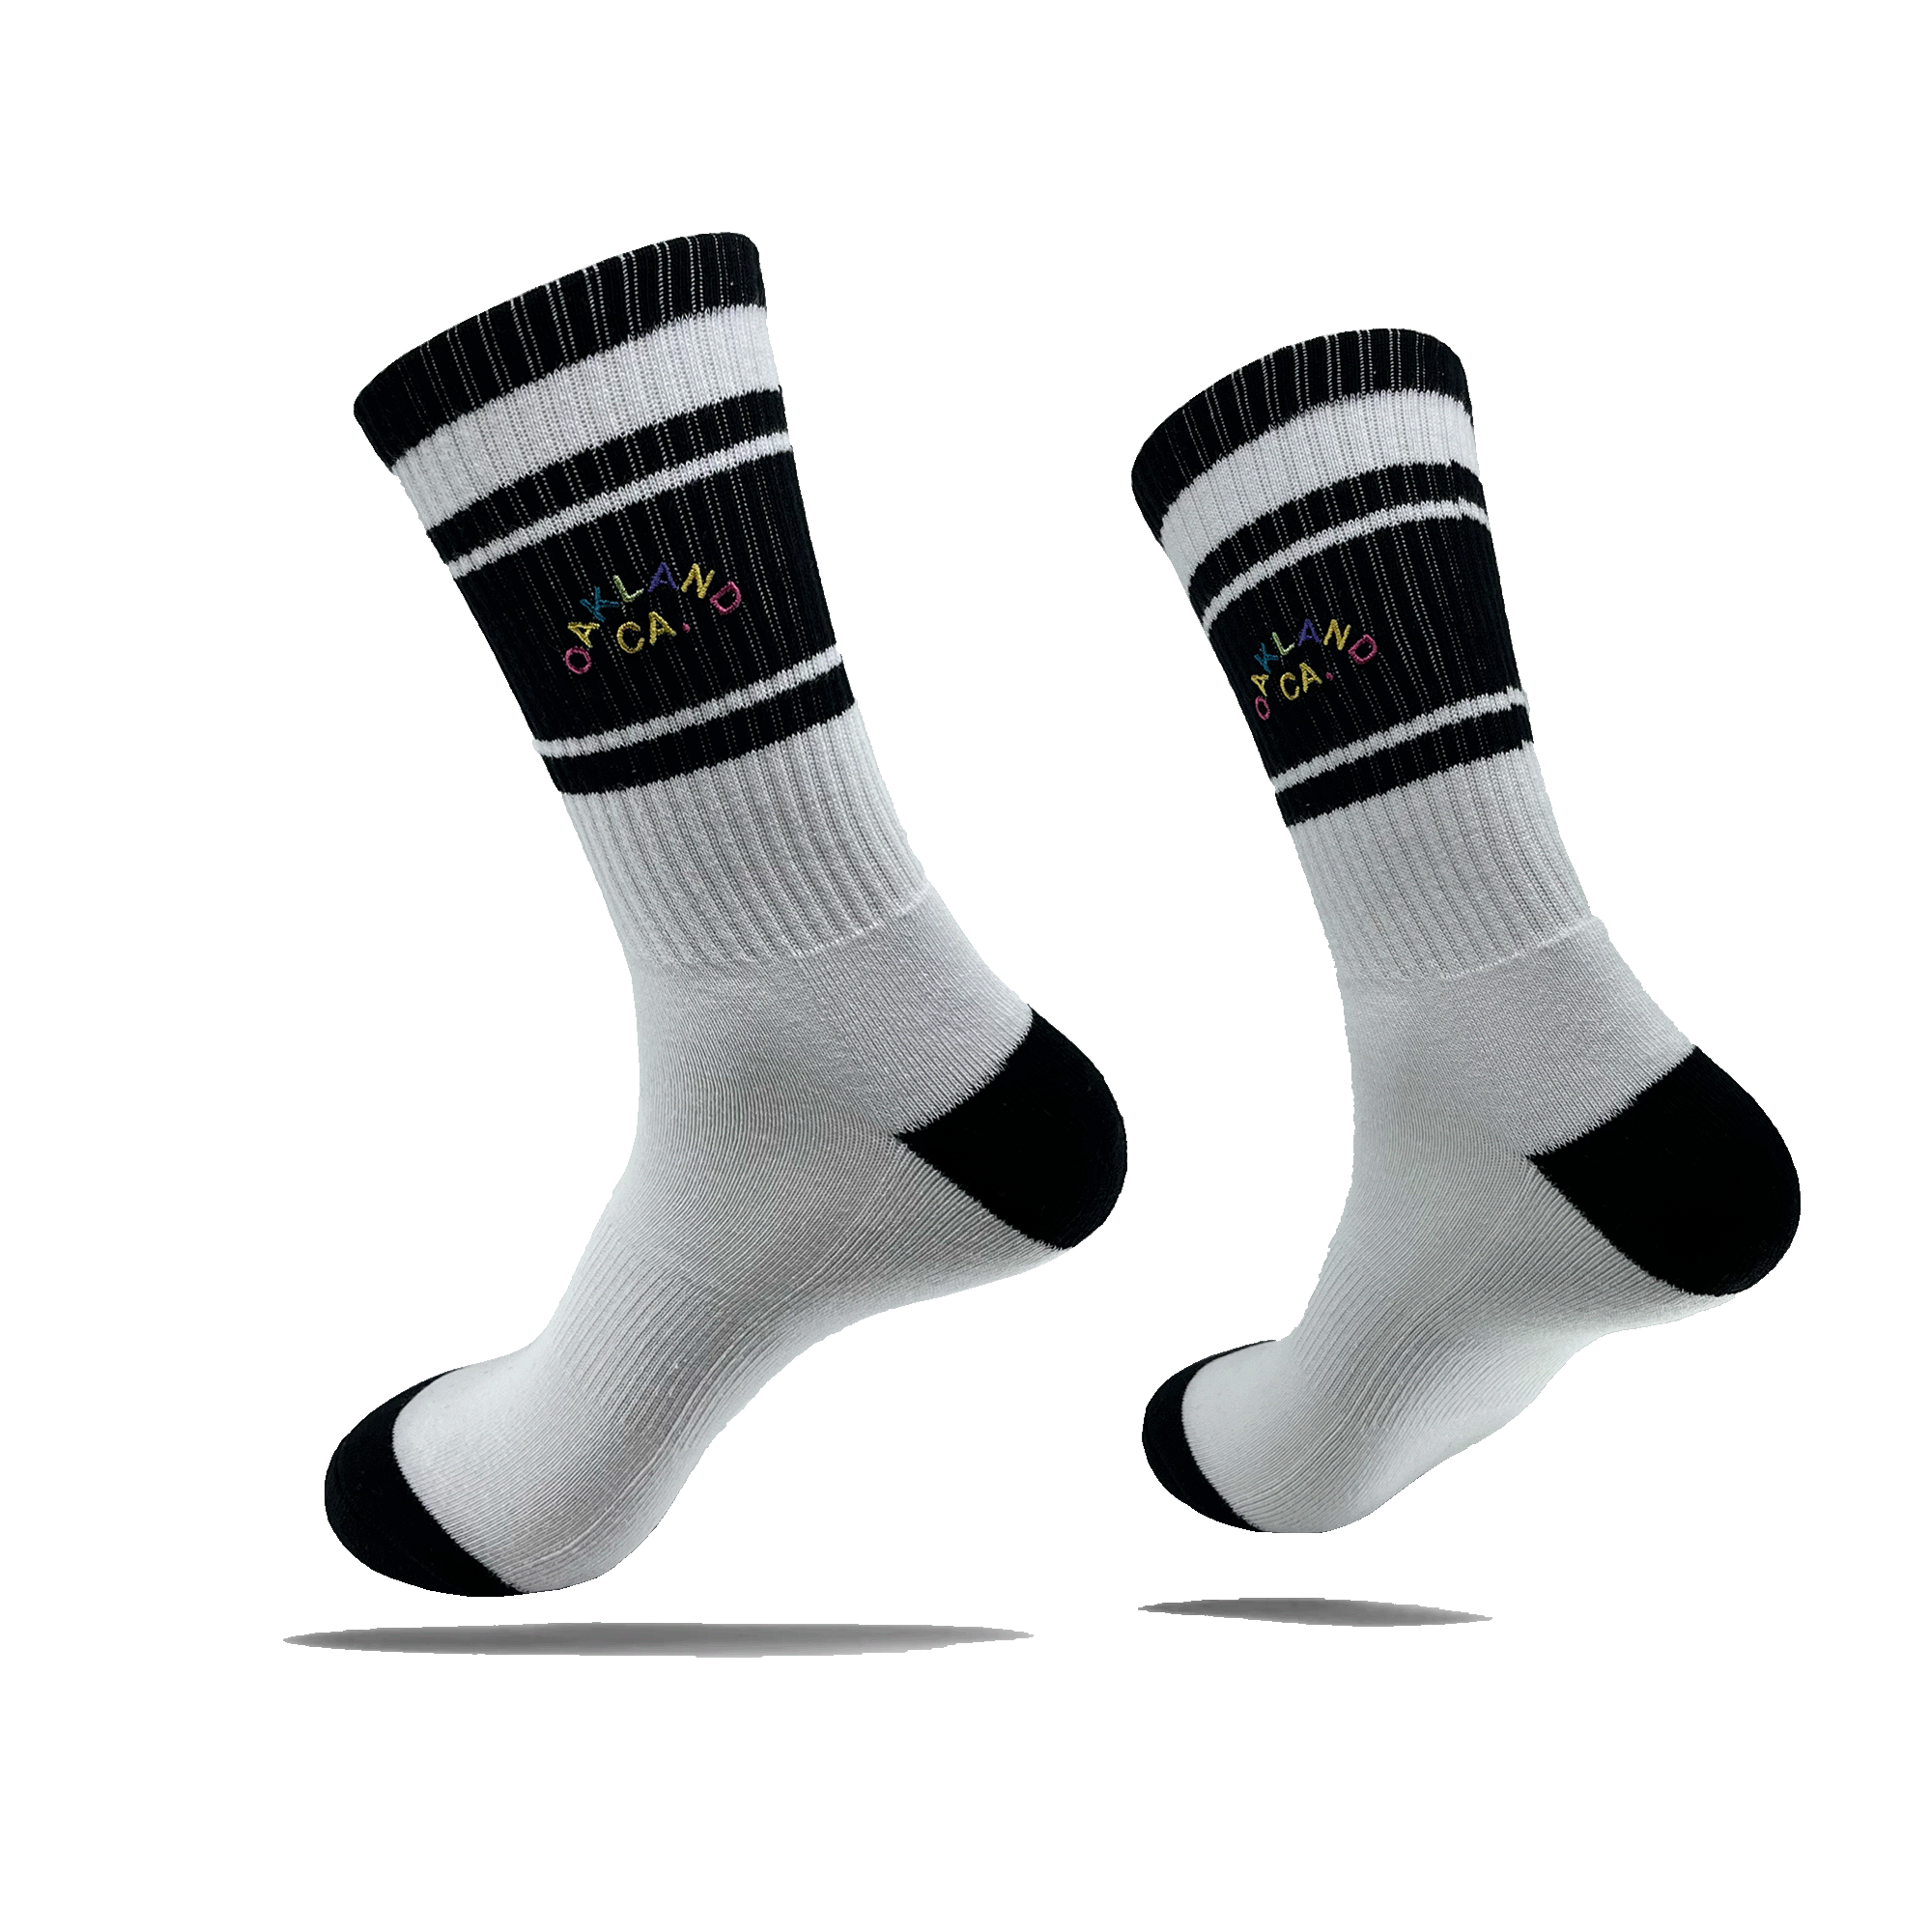 Side view of a pair of white crew socks with black stripes on the calf, black heel and toe, and full-color OAKLAND CALIFORNIA wordmark on the side calf.